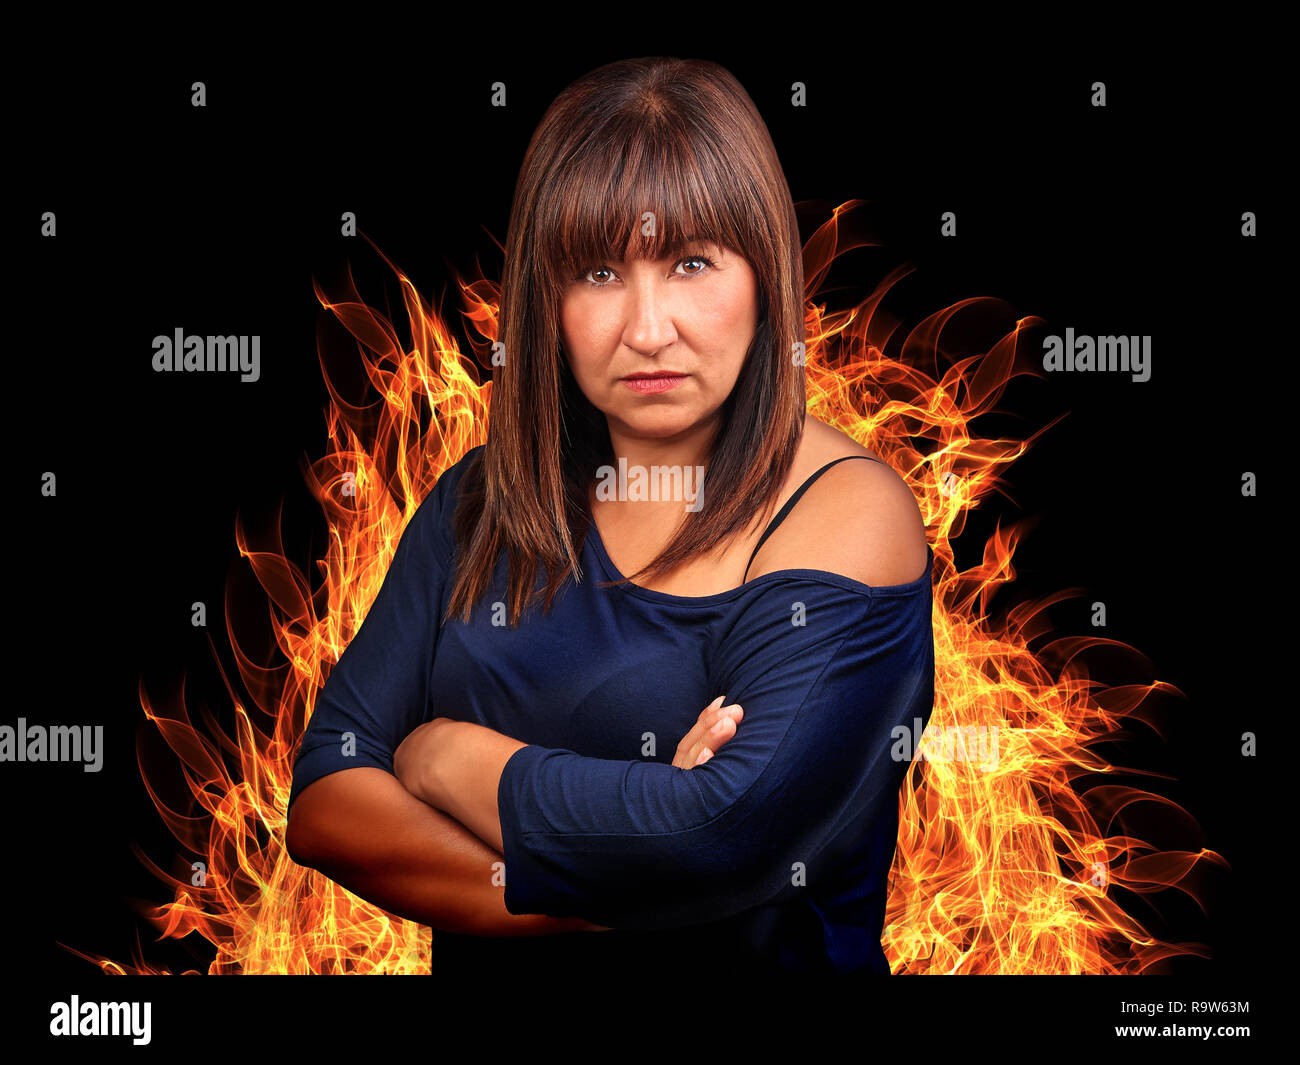 Brunette woman angry with crossed arms surrounding by fire Stock Photo